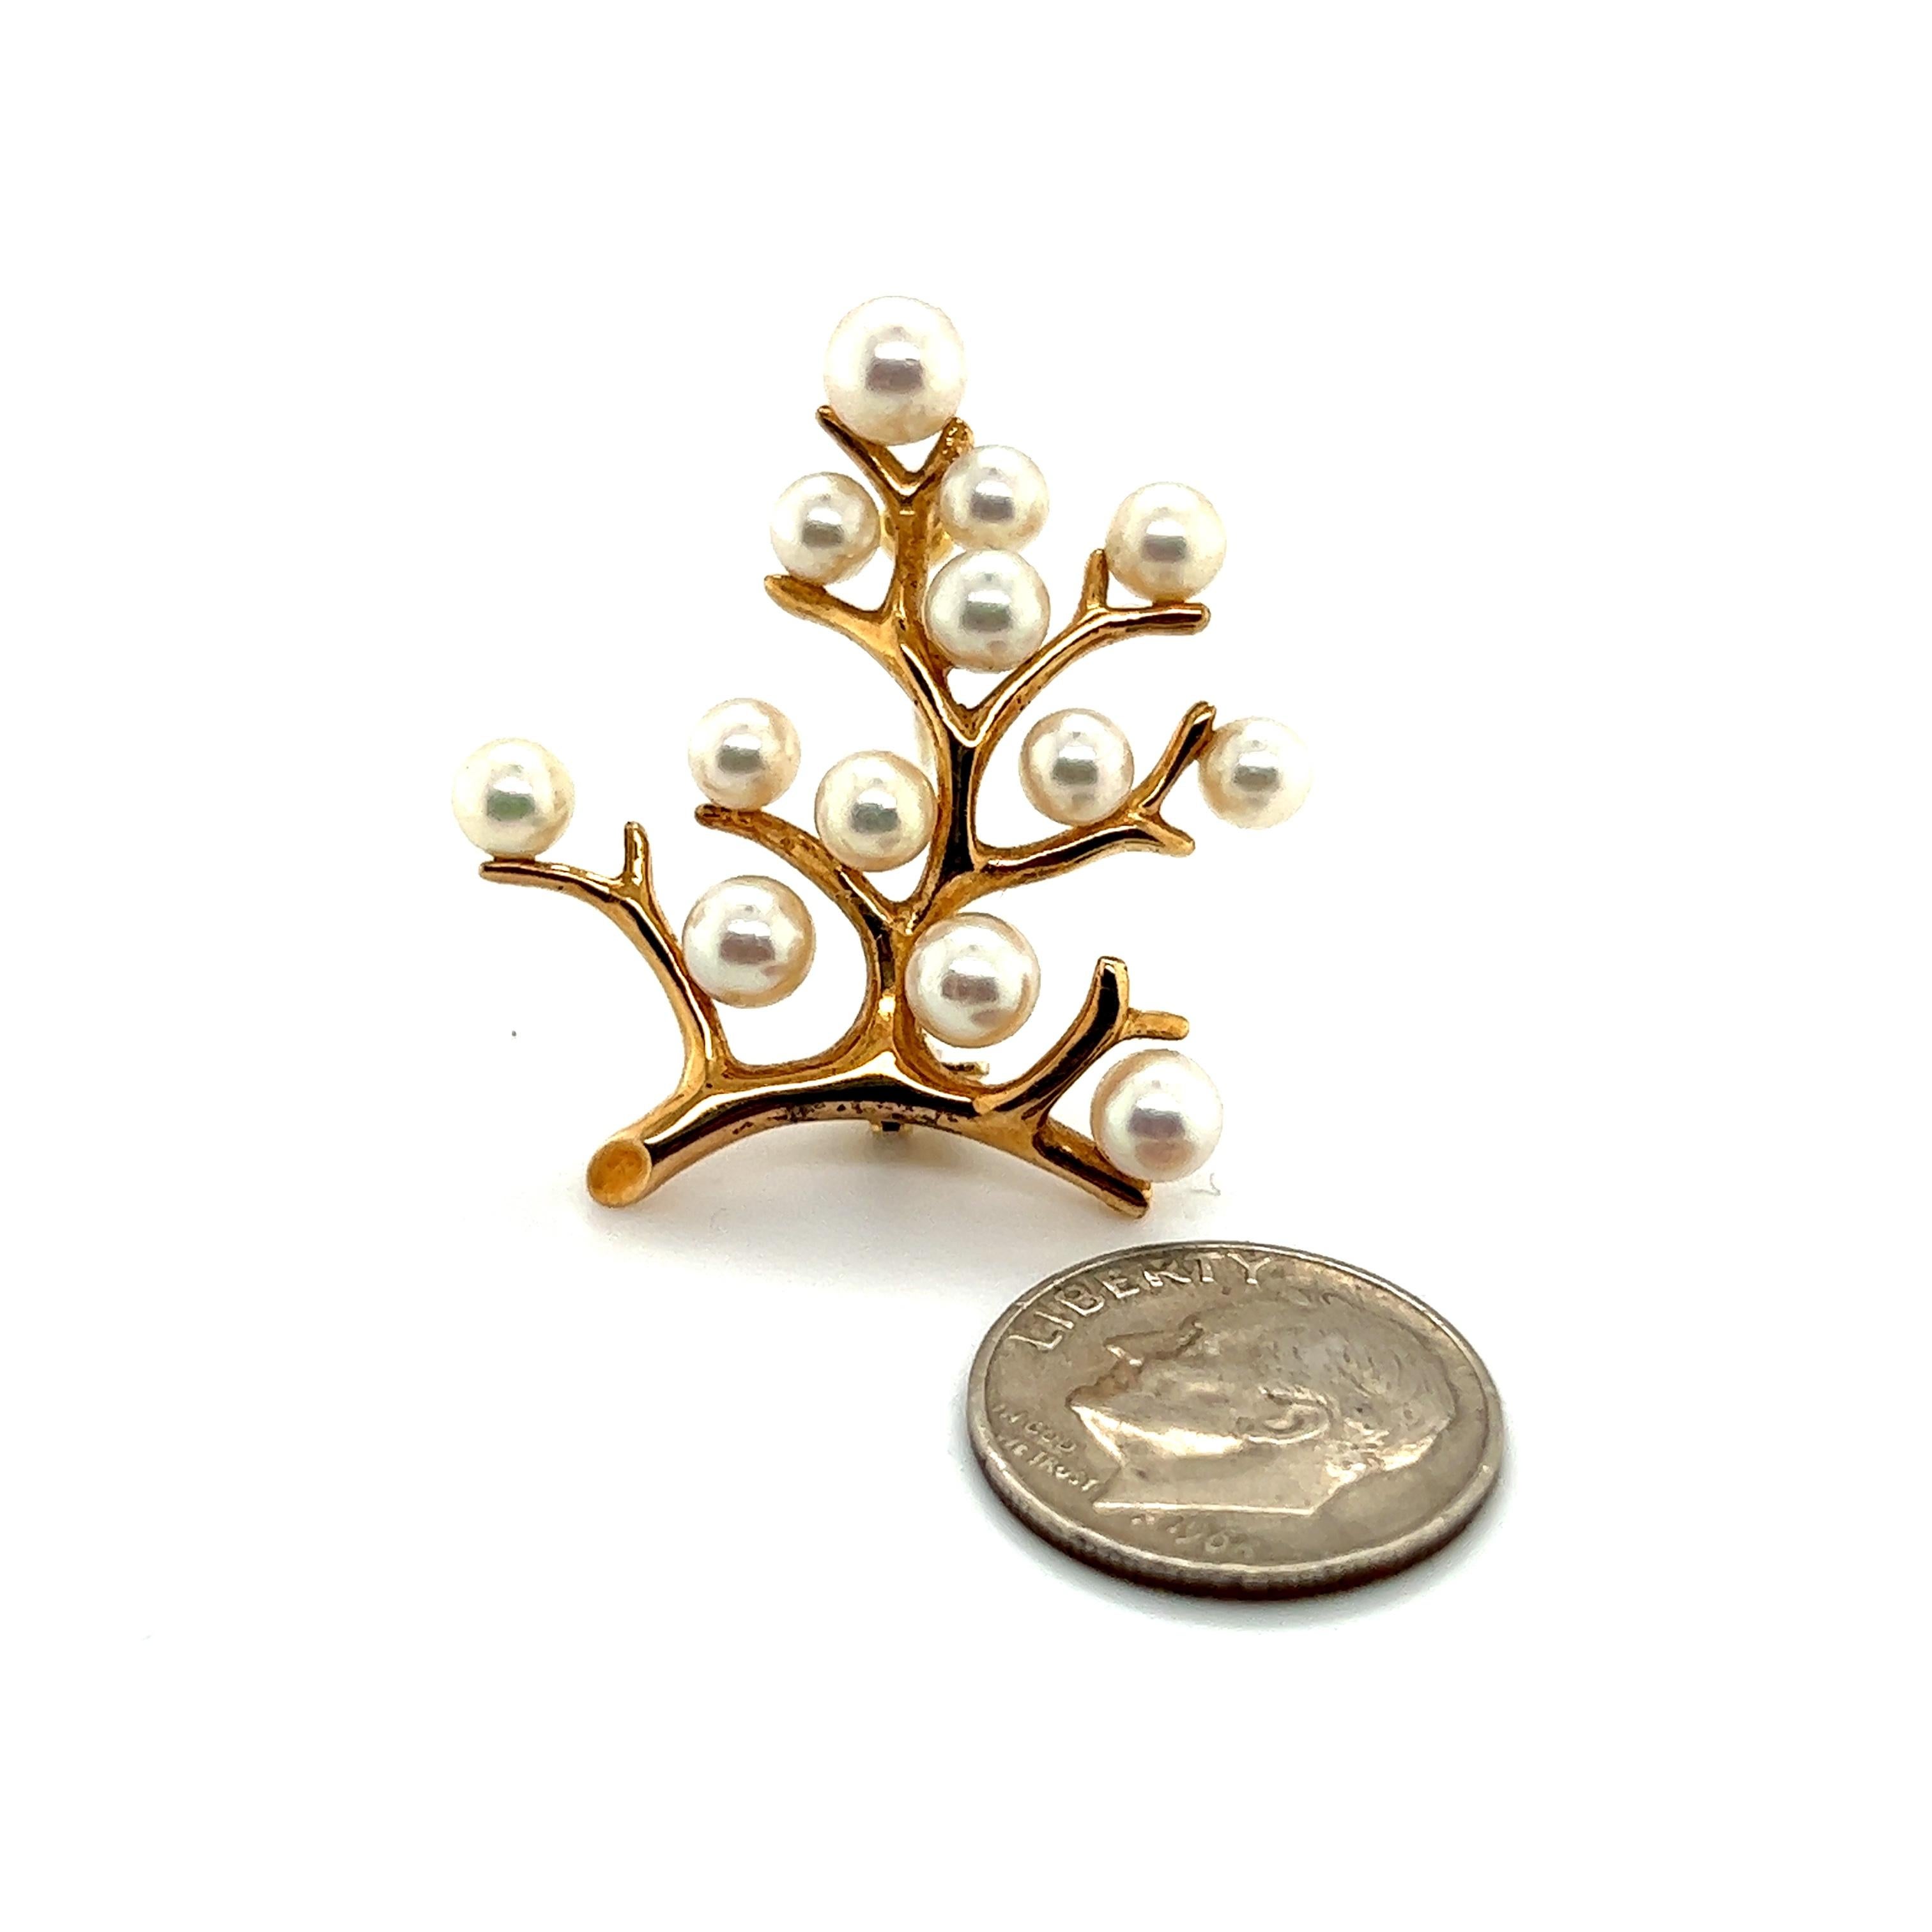 Mikimoto Estate Akoya Pearl Tree of Life Brooch 14k Gold M310

This elegant Authentic Mikimoto 14k Gold brooch has 13 Saltwater Akoya Cultured Pearls and has a weight of 6 grams.

TRUSTED SELLER SINCE 2002

PLEASE SEE OUR HUNDREDS OF POSITIVE